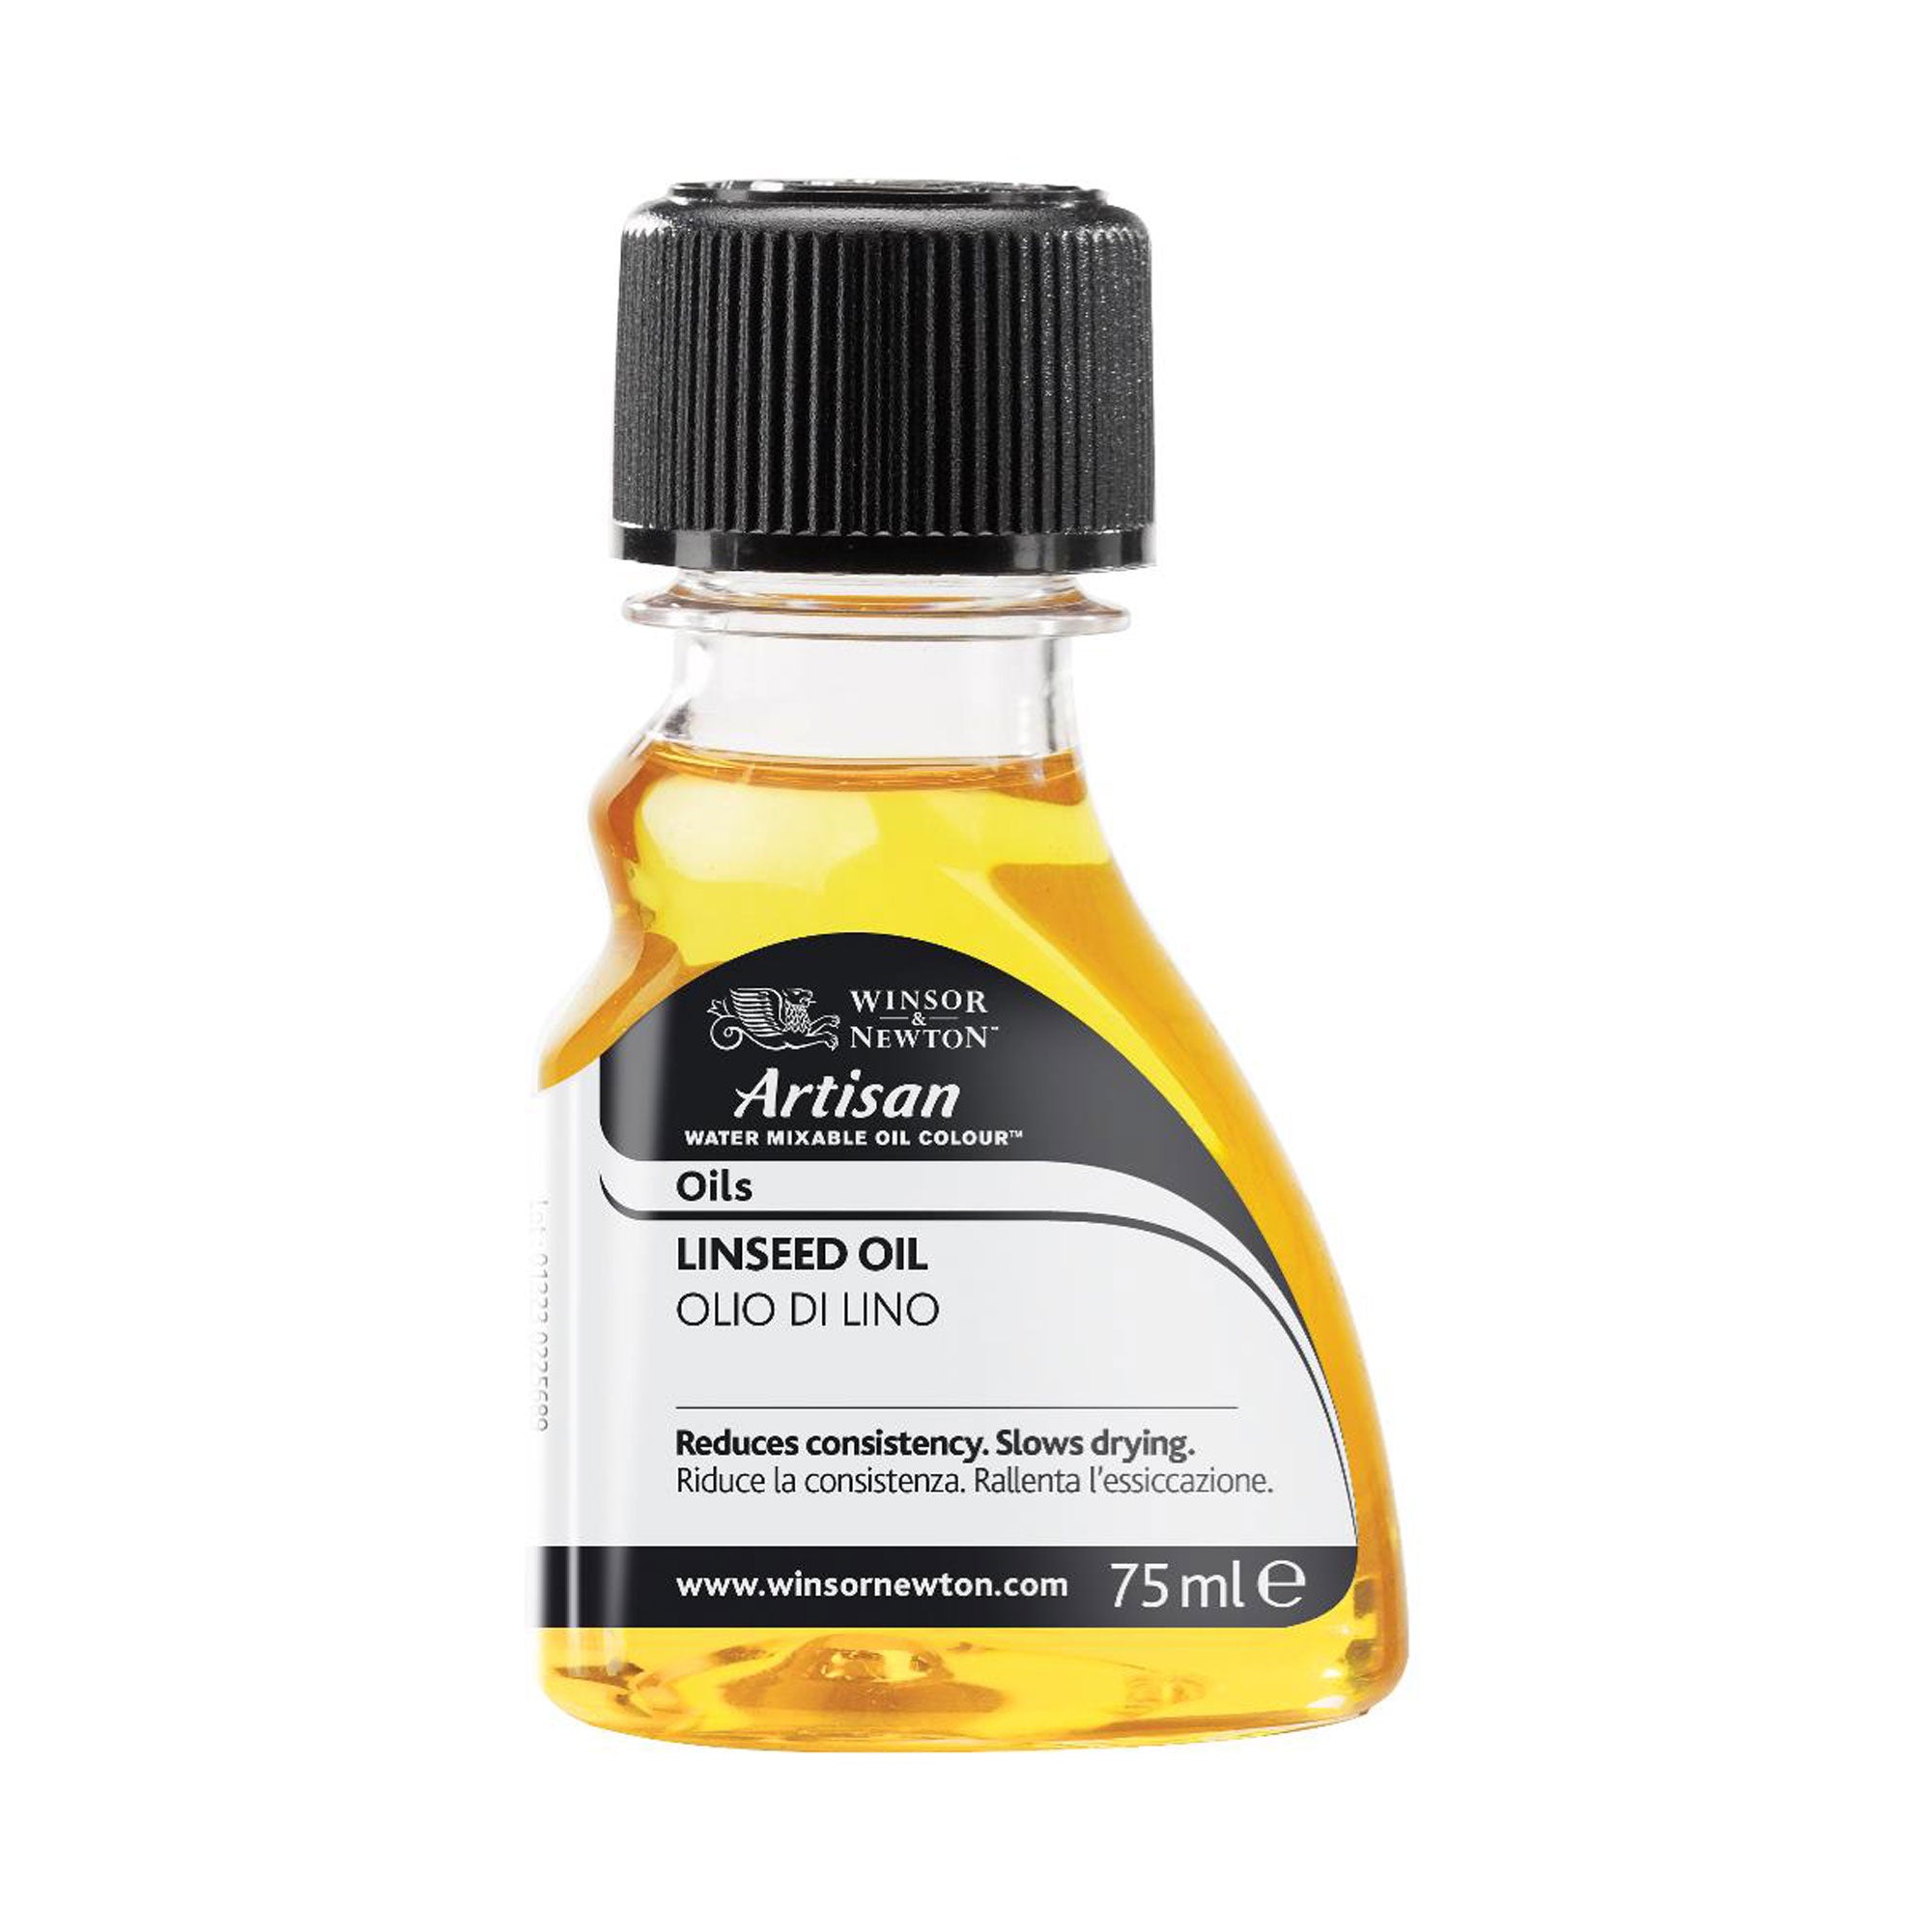 Winsor & Newton Artisan Water Mixable Linseed Oil - 75ml Bottle